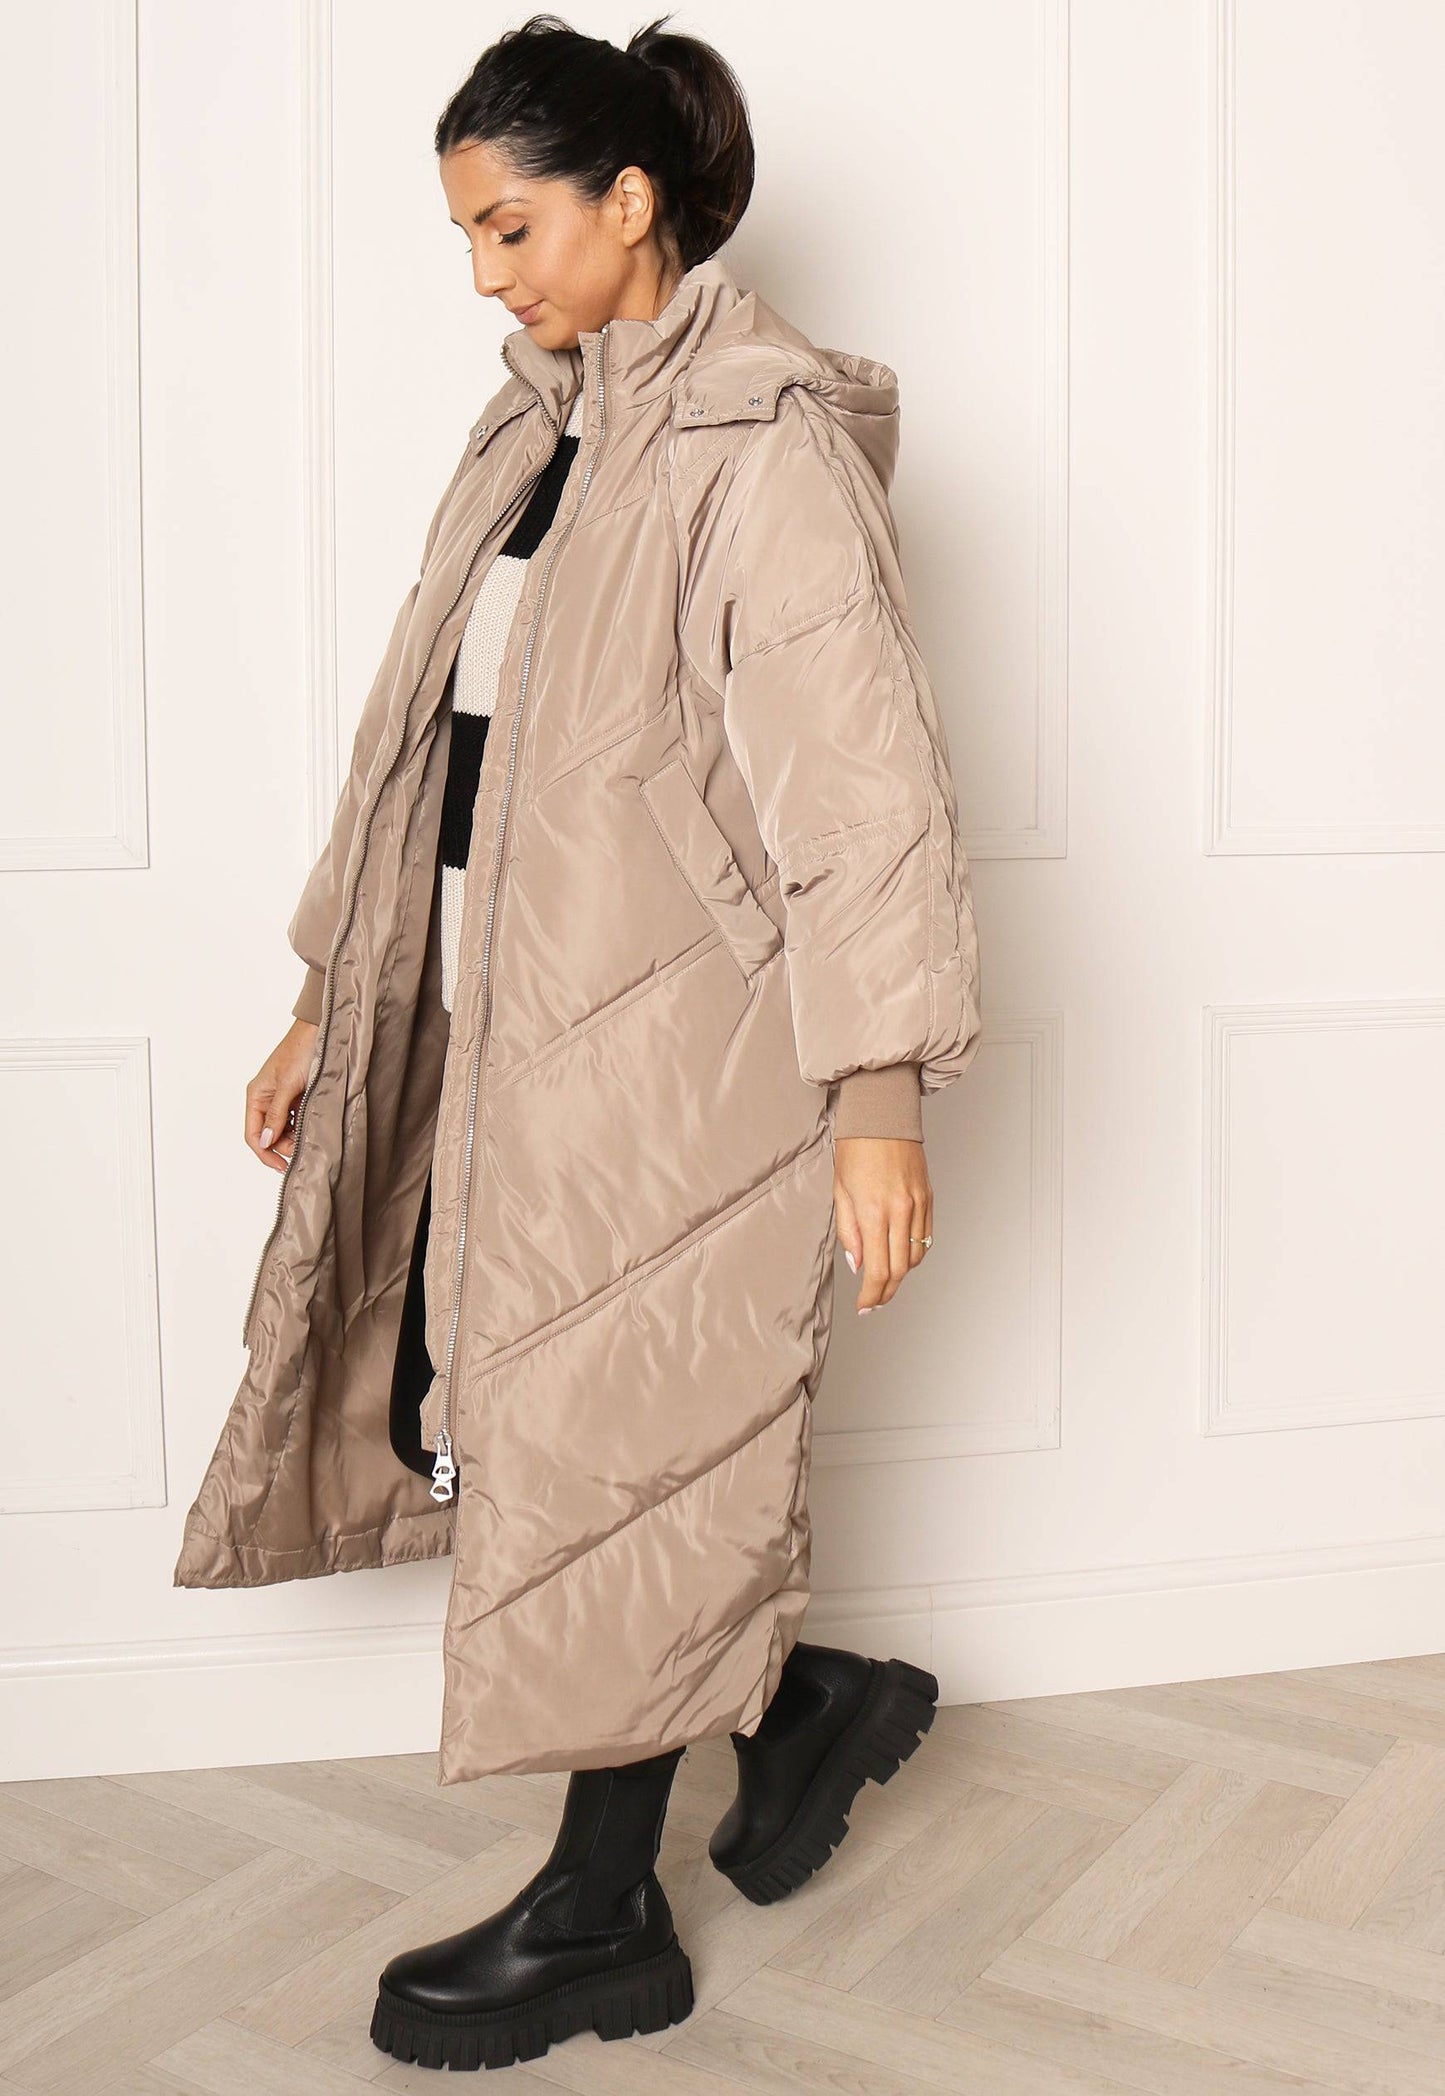 PIECES Felicity Maxi Longline Chevron Duvet Puffer Coat with Hood in Beige - One Nation Clothing